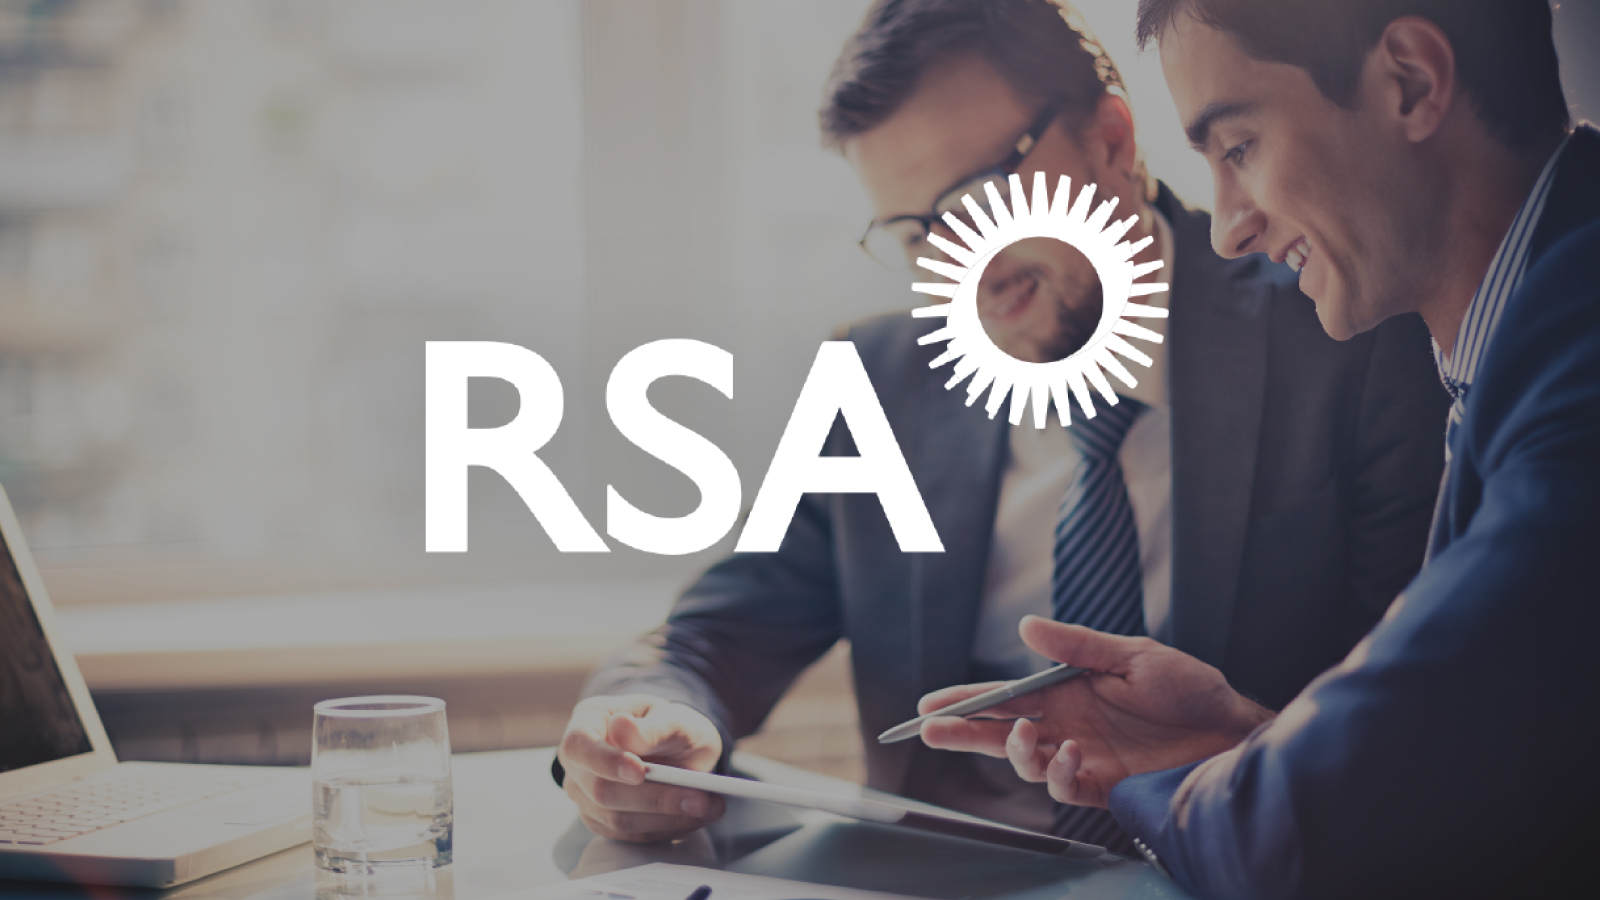 Graphic: RSA logo overlayed on colleagues planning with tablet